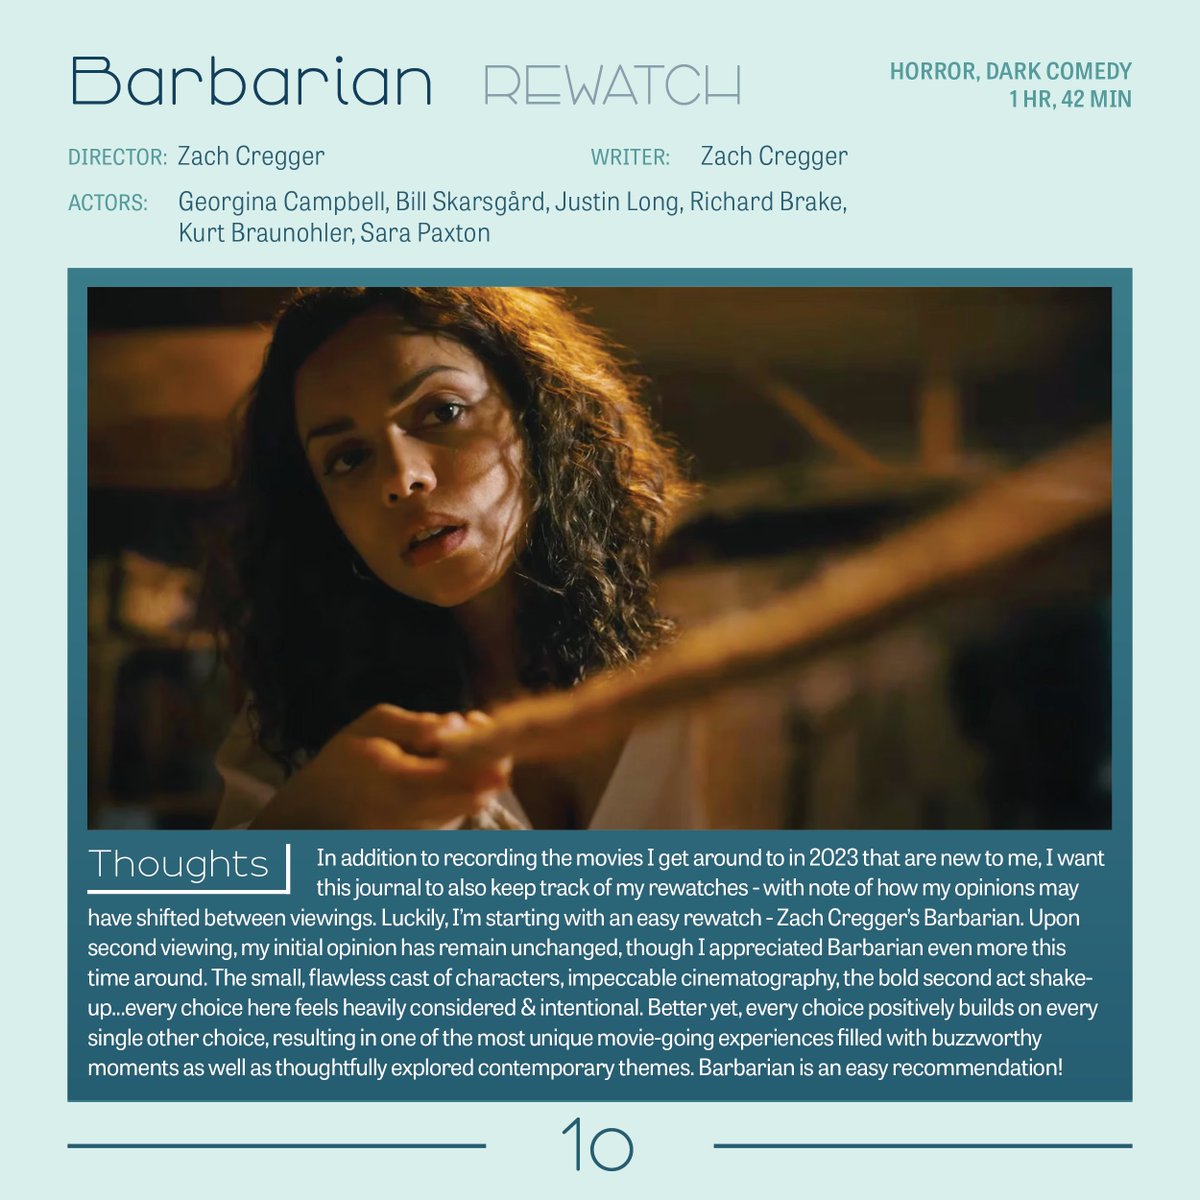 #2023MovieJournal
#13 of 2023 - #Barbarian
Written and Directed by: #ZachCregger
Starring: #GeorginaCampbell, #BillSkarsgård, #JustinLong, #KurtBraunholer, #SaraPaxton
Streaming on: #HBOMax 

For more thoughts, check out this recent @expgrindpodcast ep:
experiencegrind.com/barbarian-ft-r…